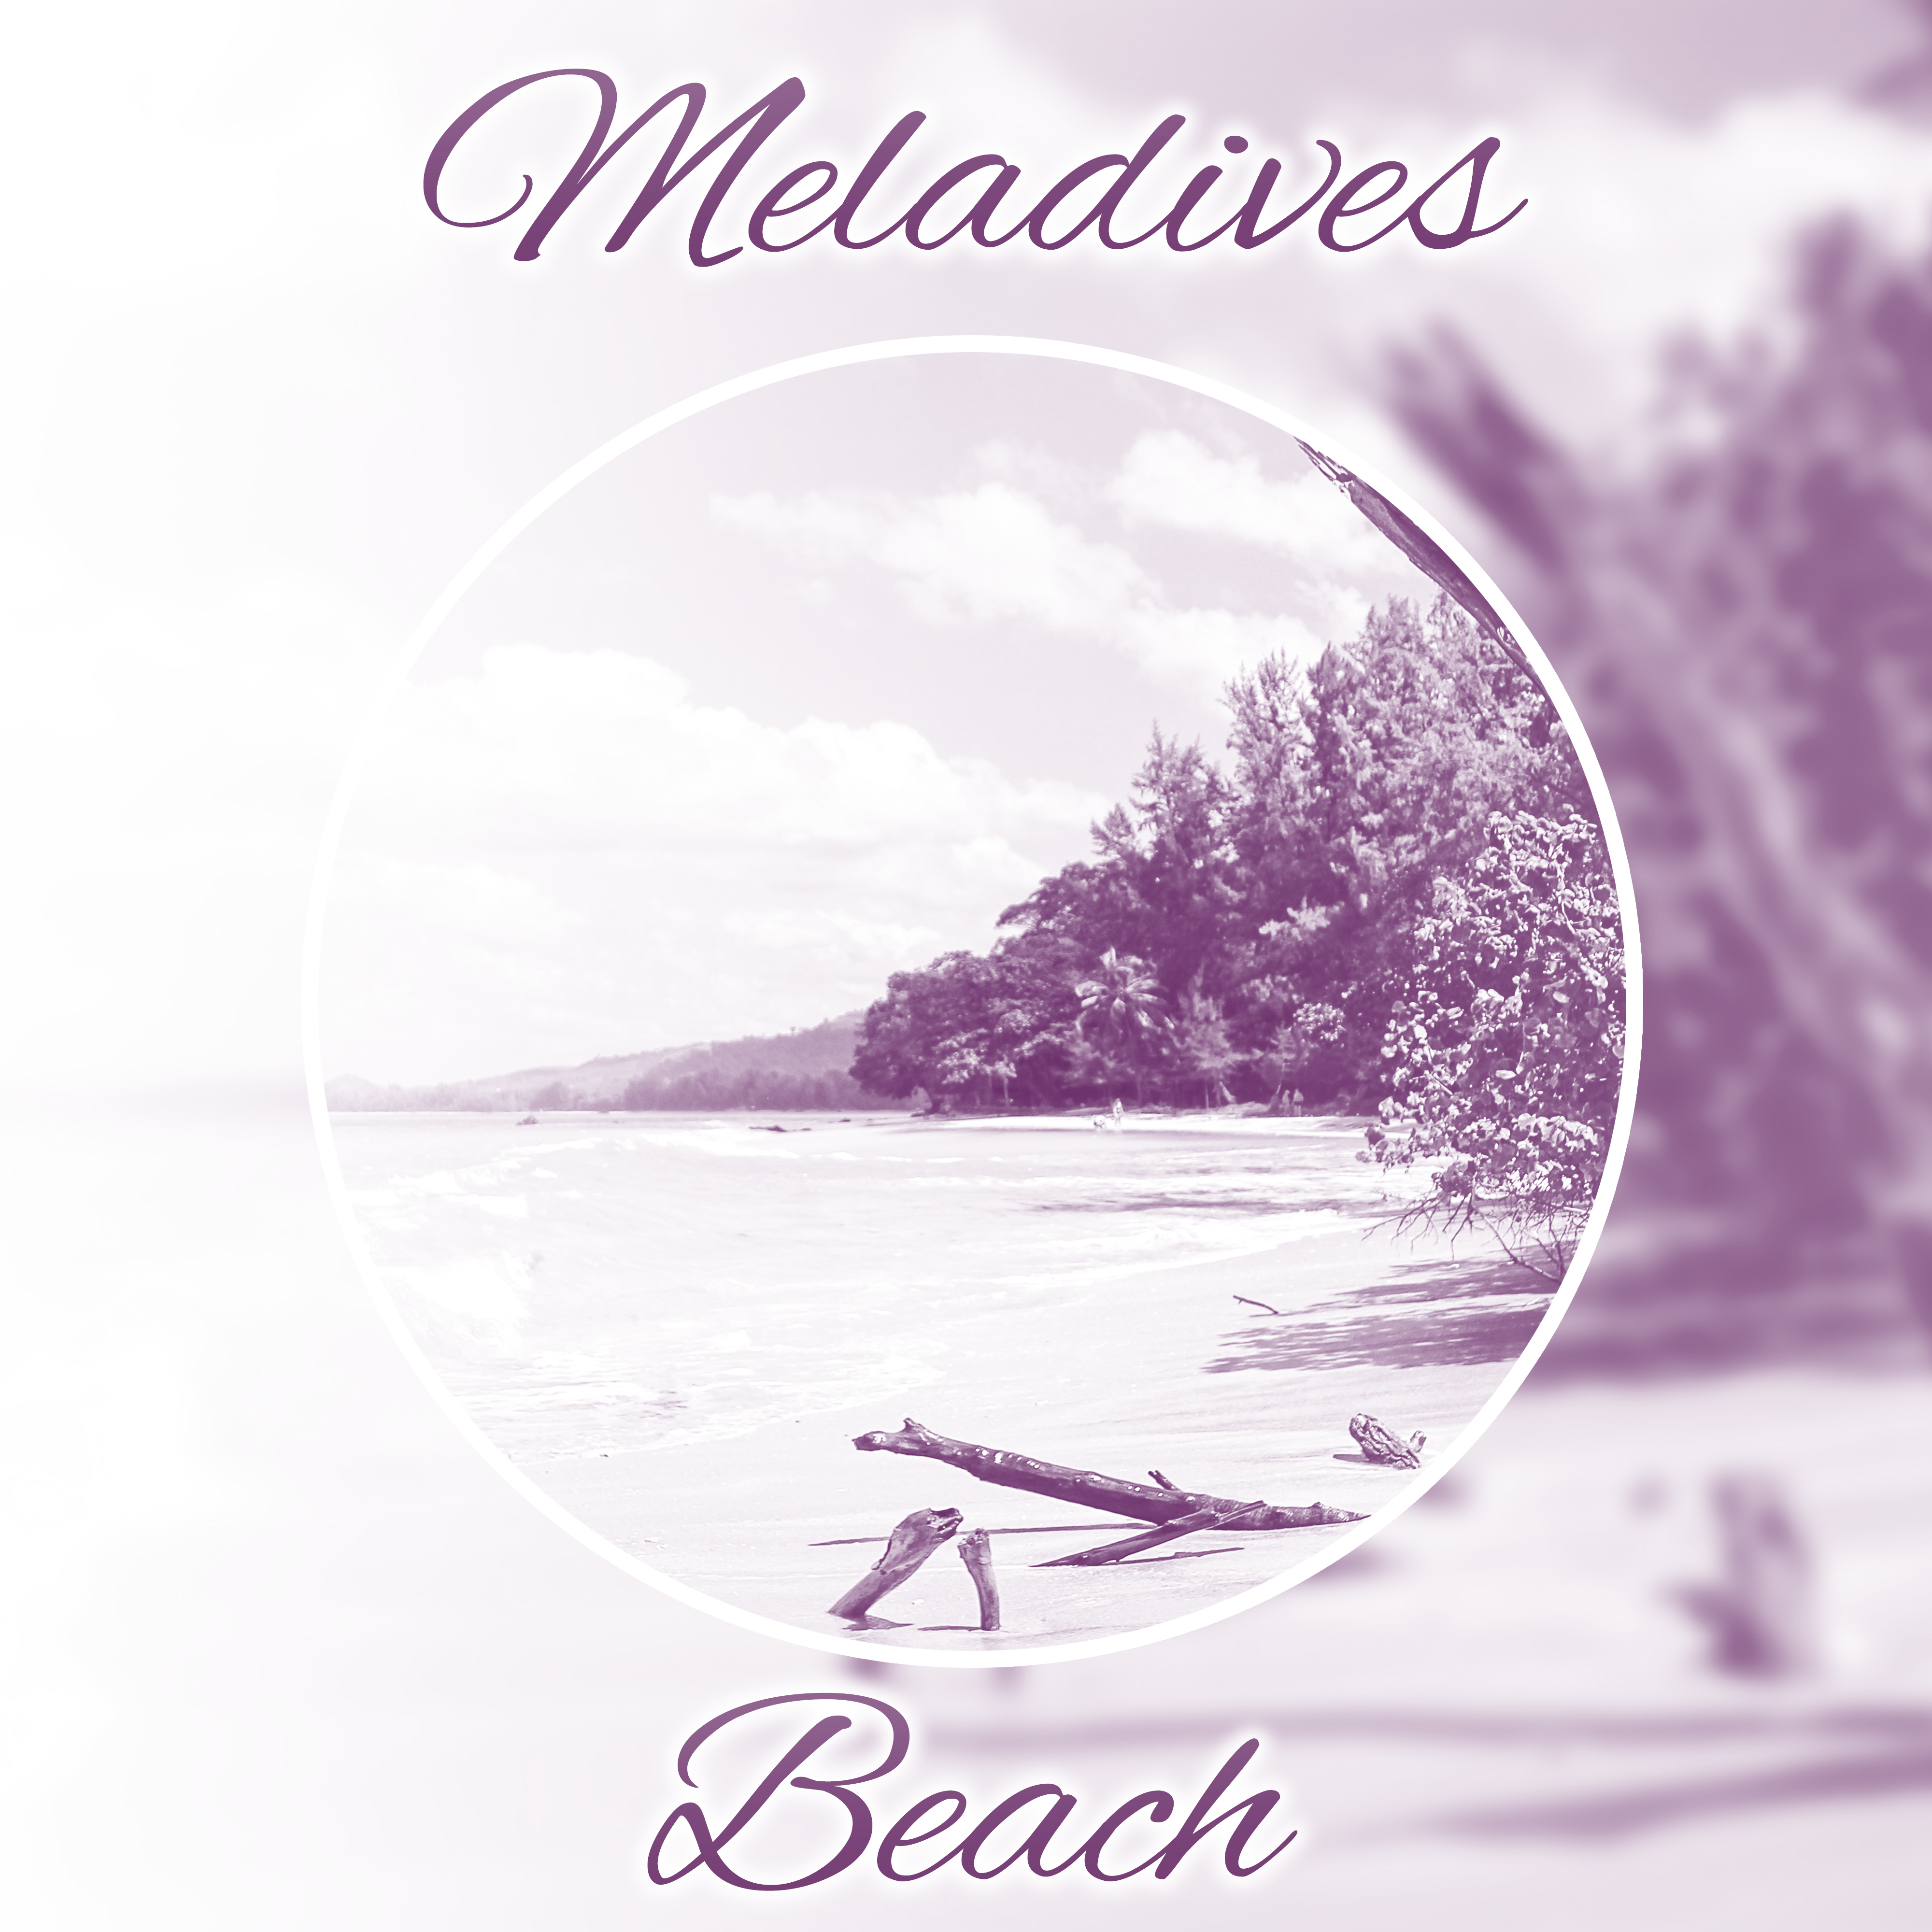 Meladives Beach  Calming Chill Out Sounds, Waves of Calmness, Stress Relief, Summer 2017